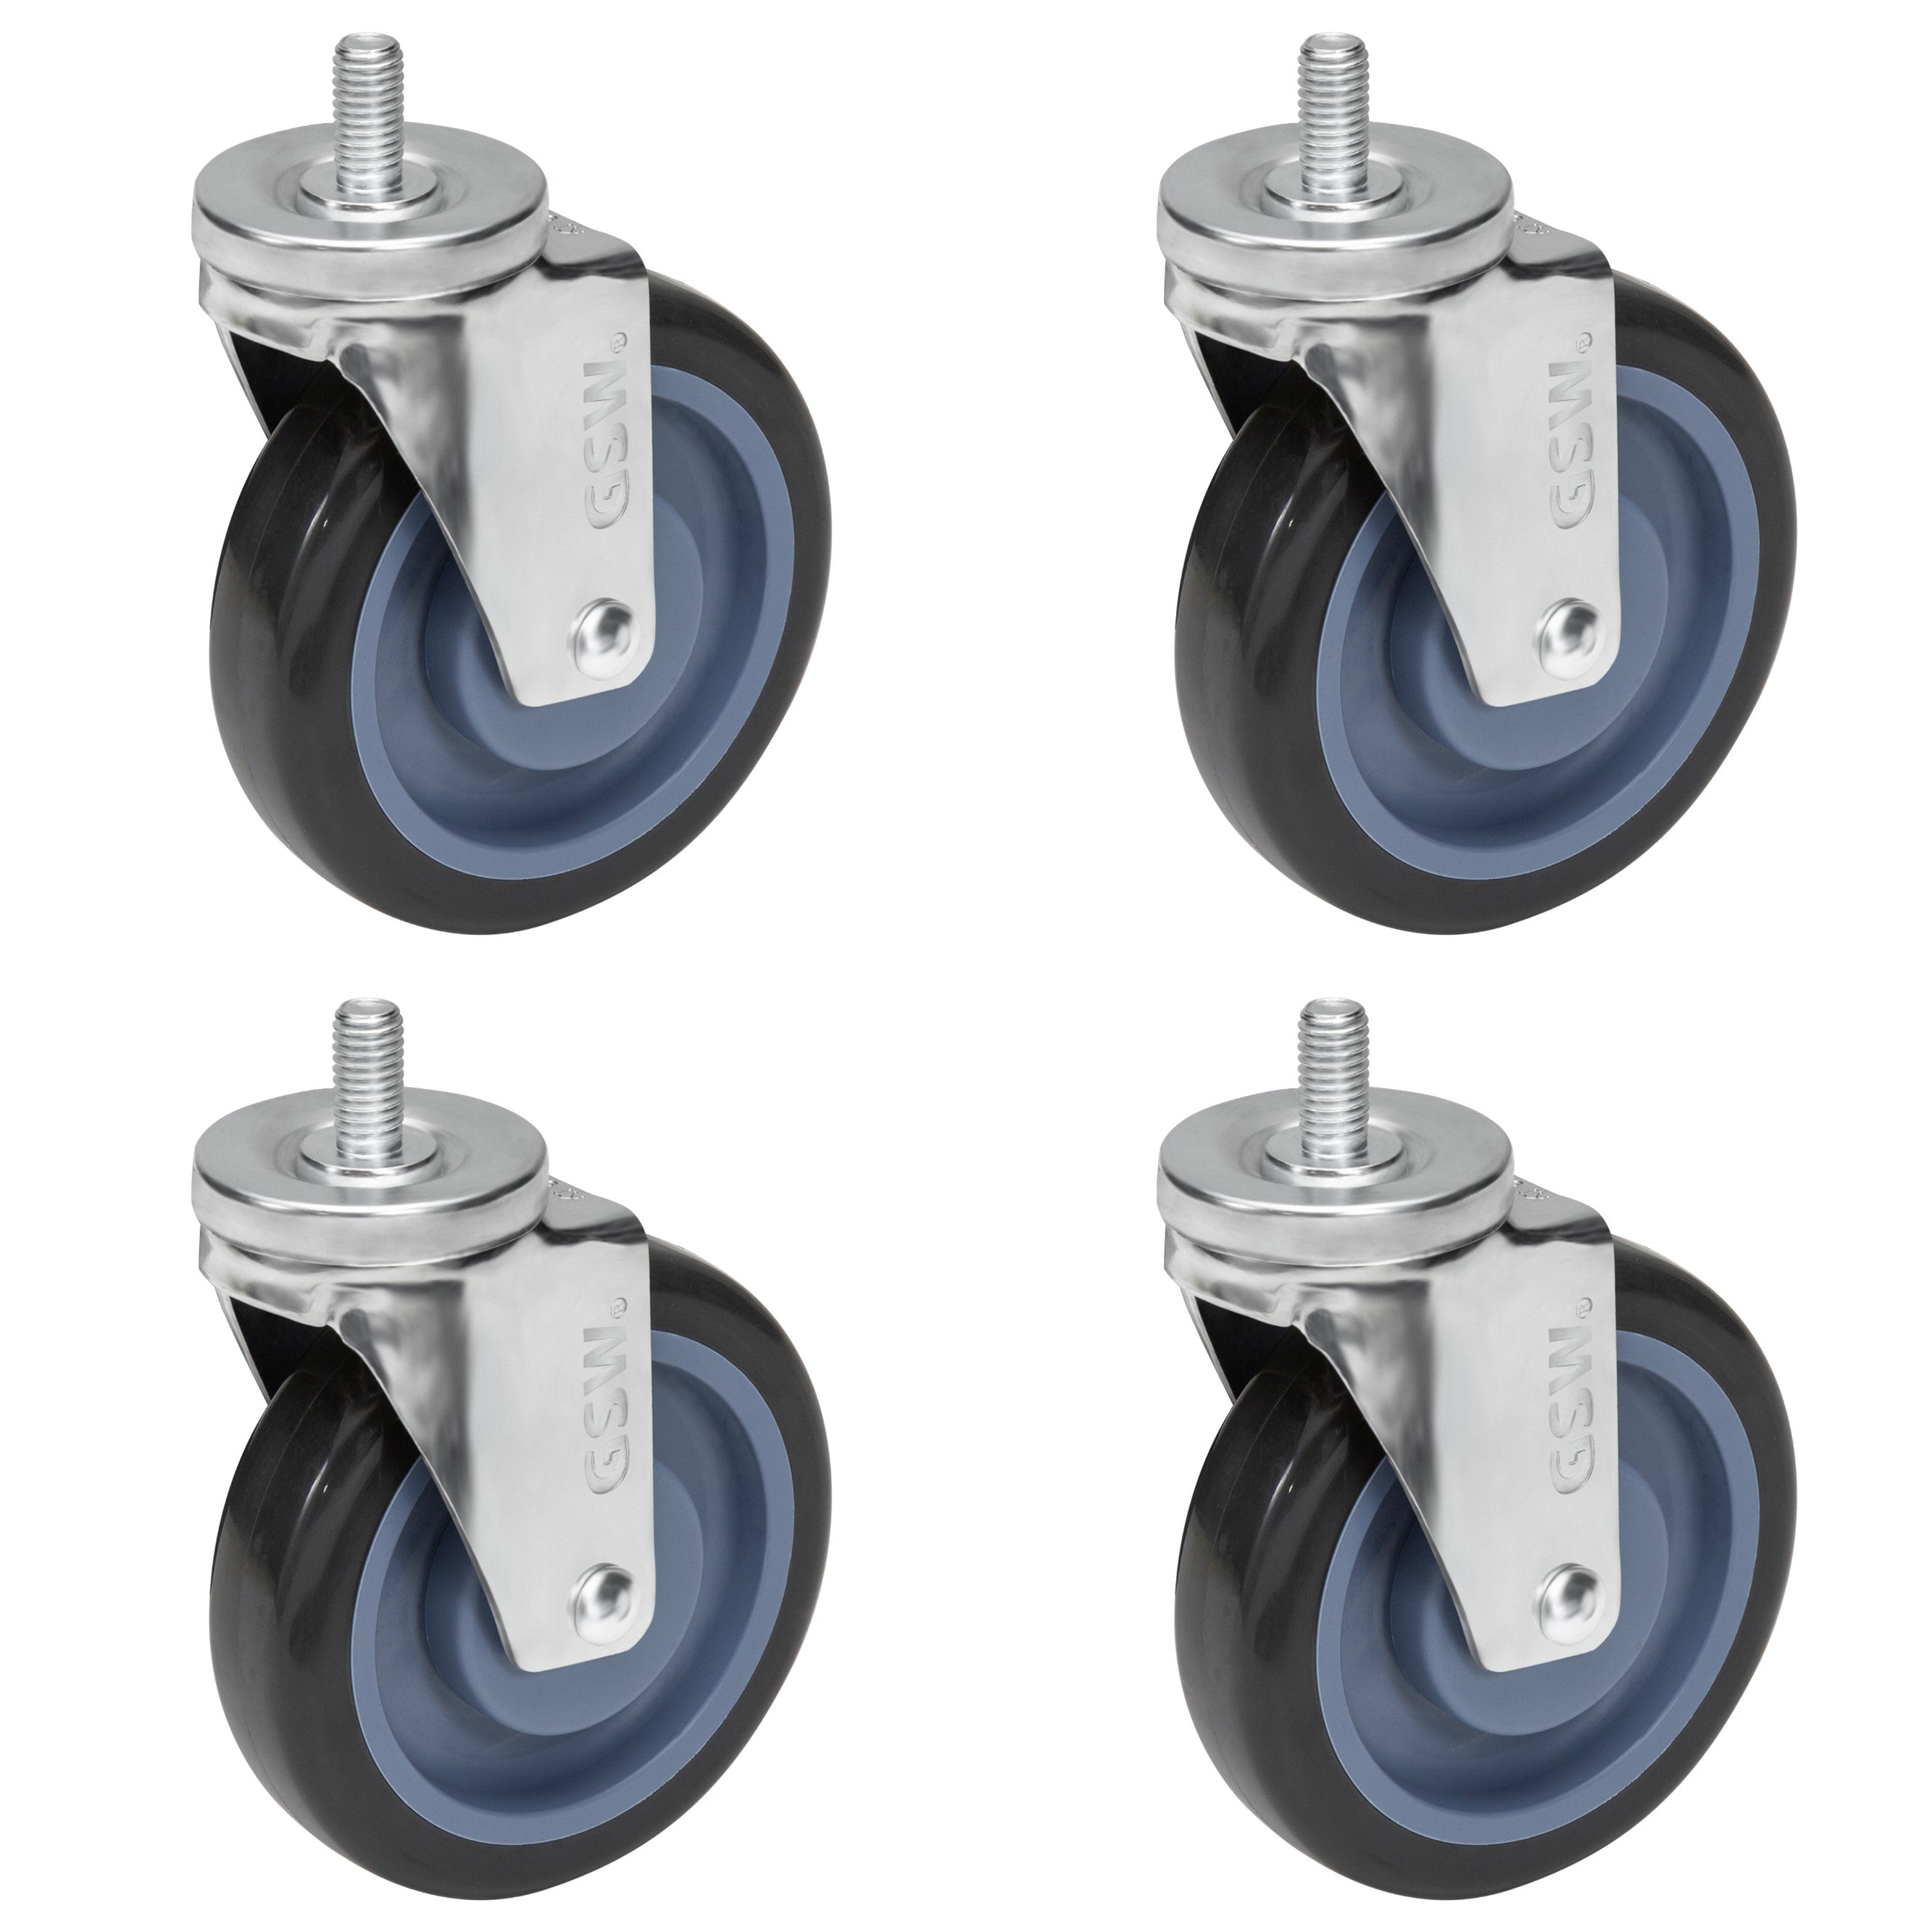 GSW 3" Caster Replacement Shopping Cart Wheels, Polyurethane Stem Casters Set of 4 for most refrigerators, Cart with Loading Capacity 1160 Lbs (Swivel)